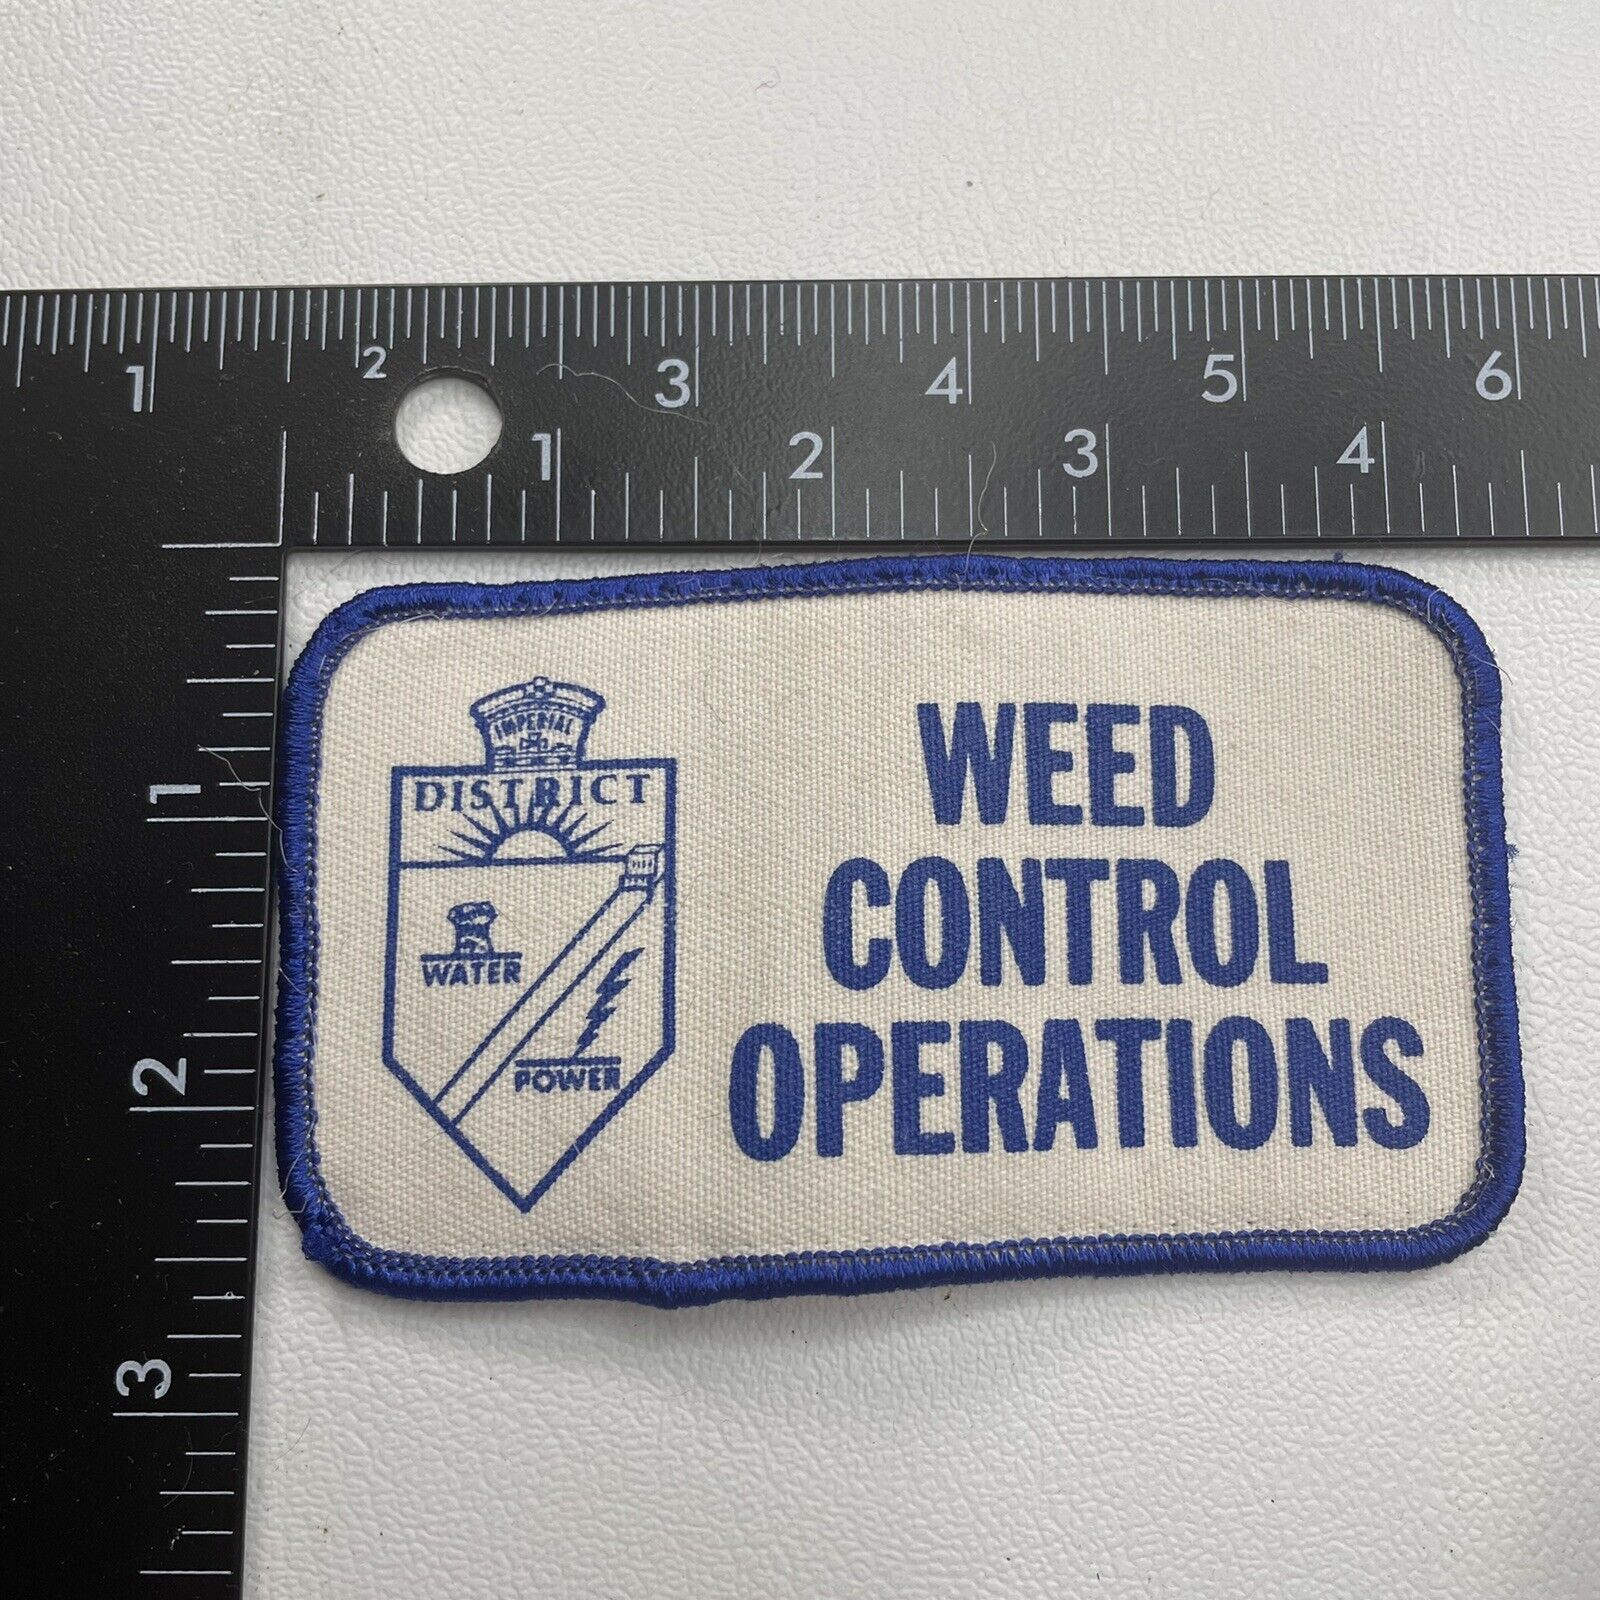 Vtg IMPERIAL DISTRICT WATER & POWER WEED CONTROL OPERATIONS Ad Patch 12V2